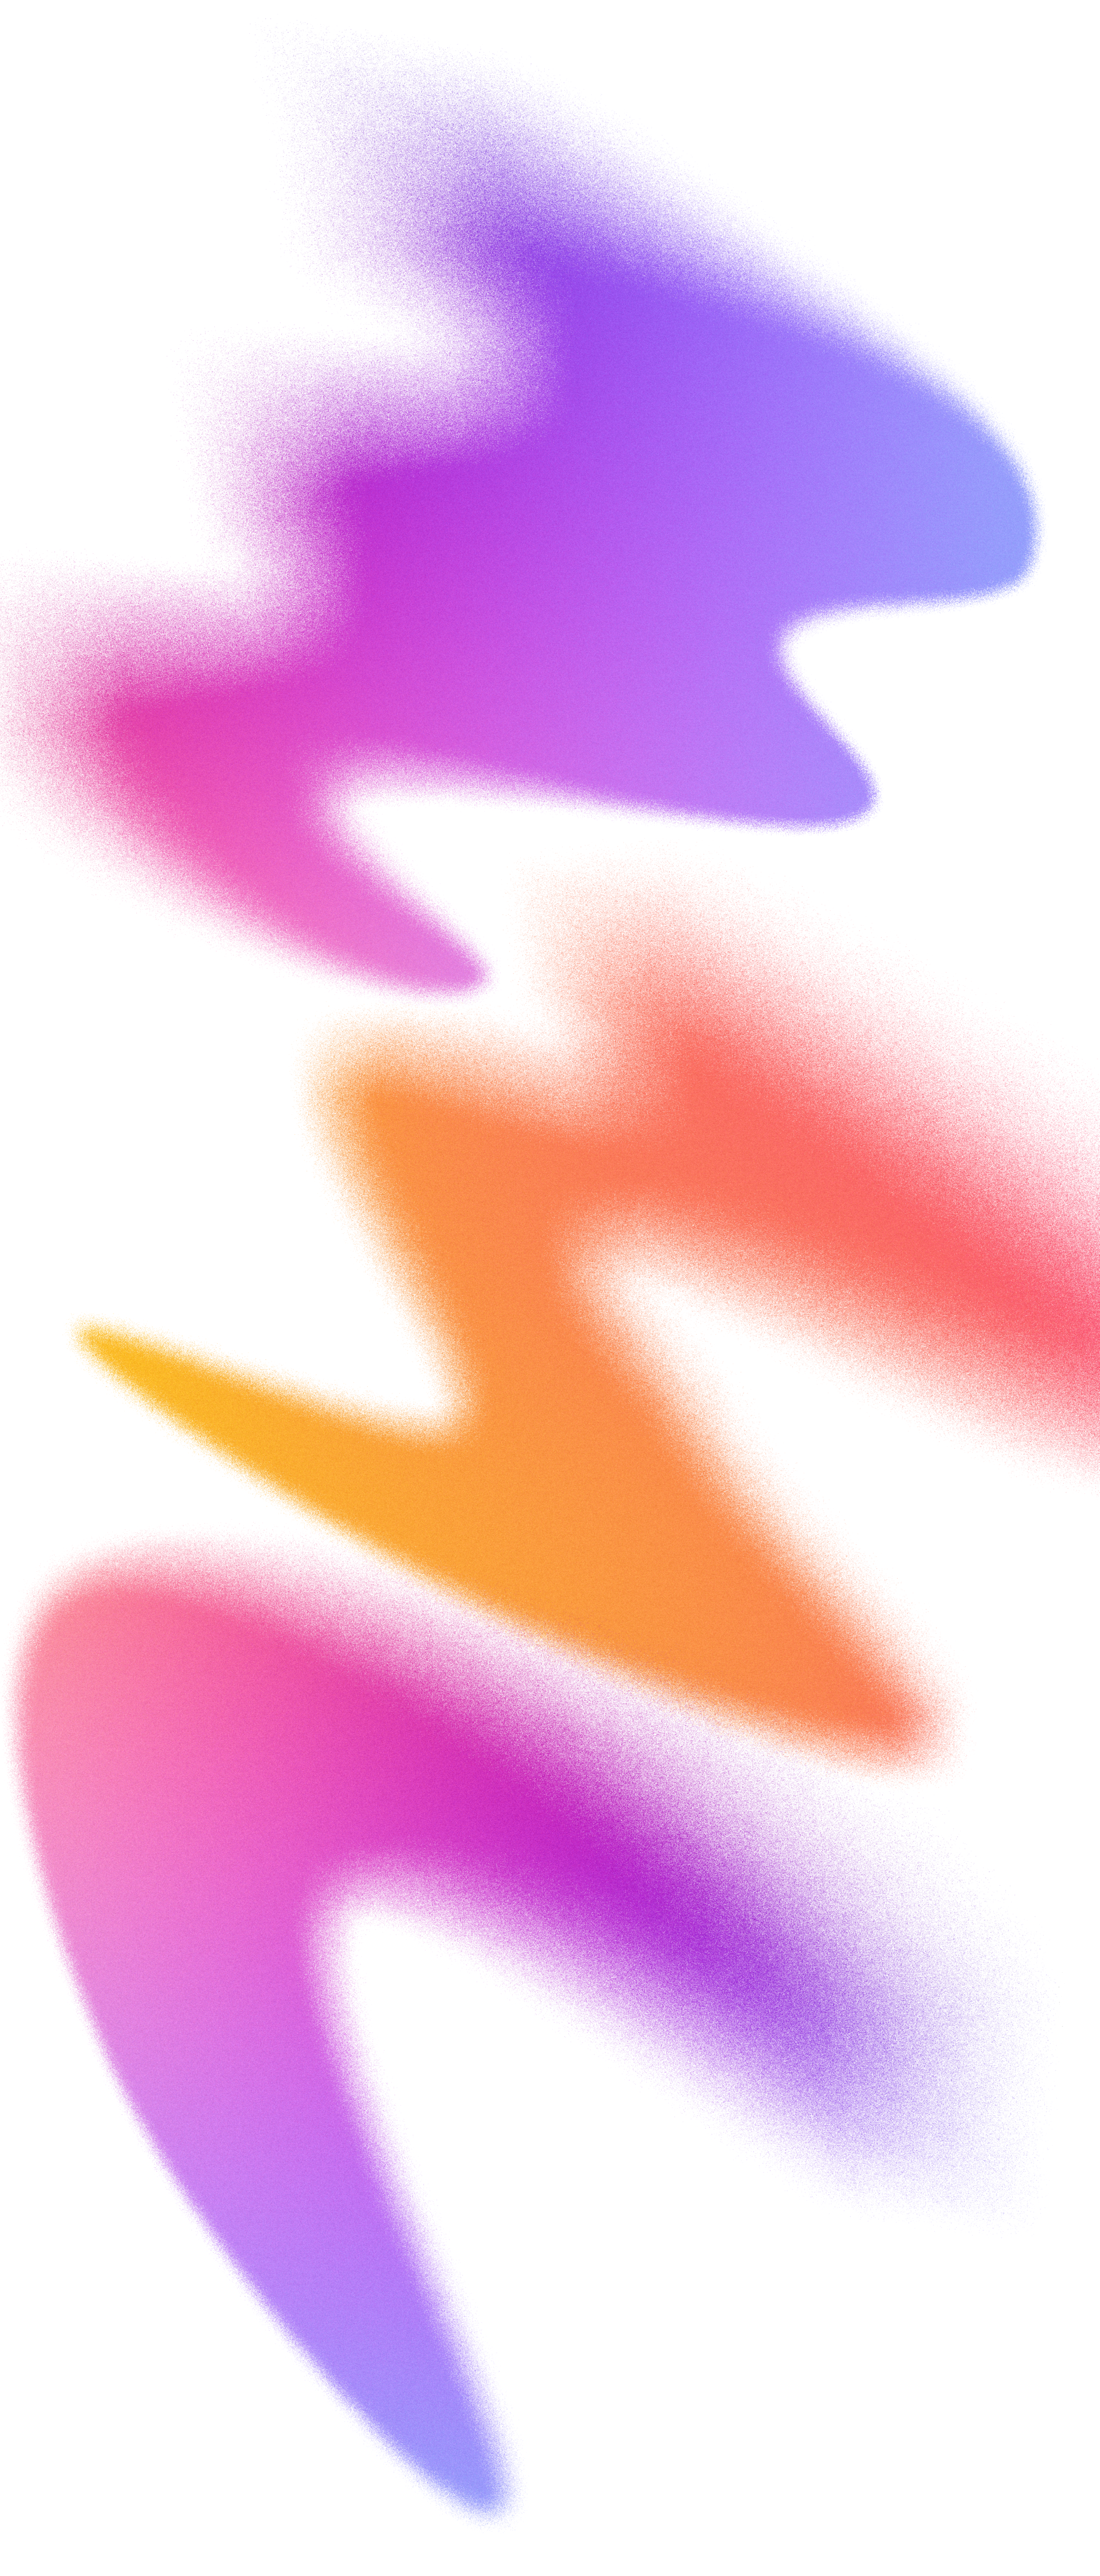 colorful wavy shapes